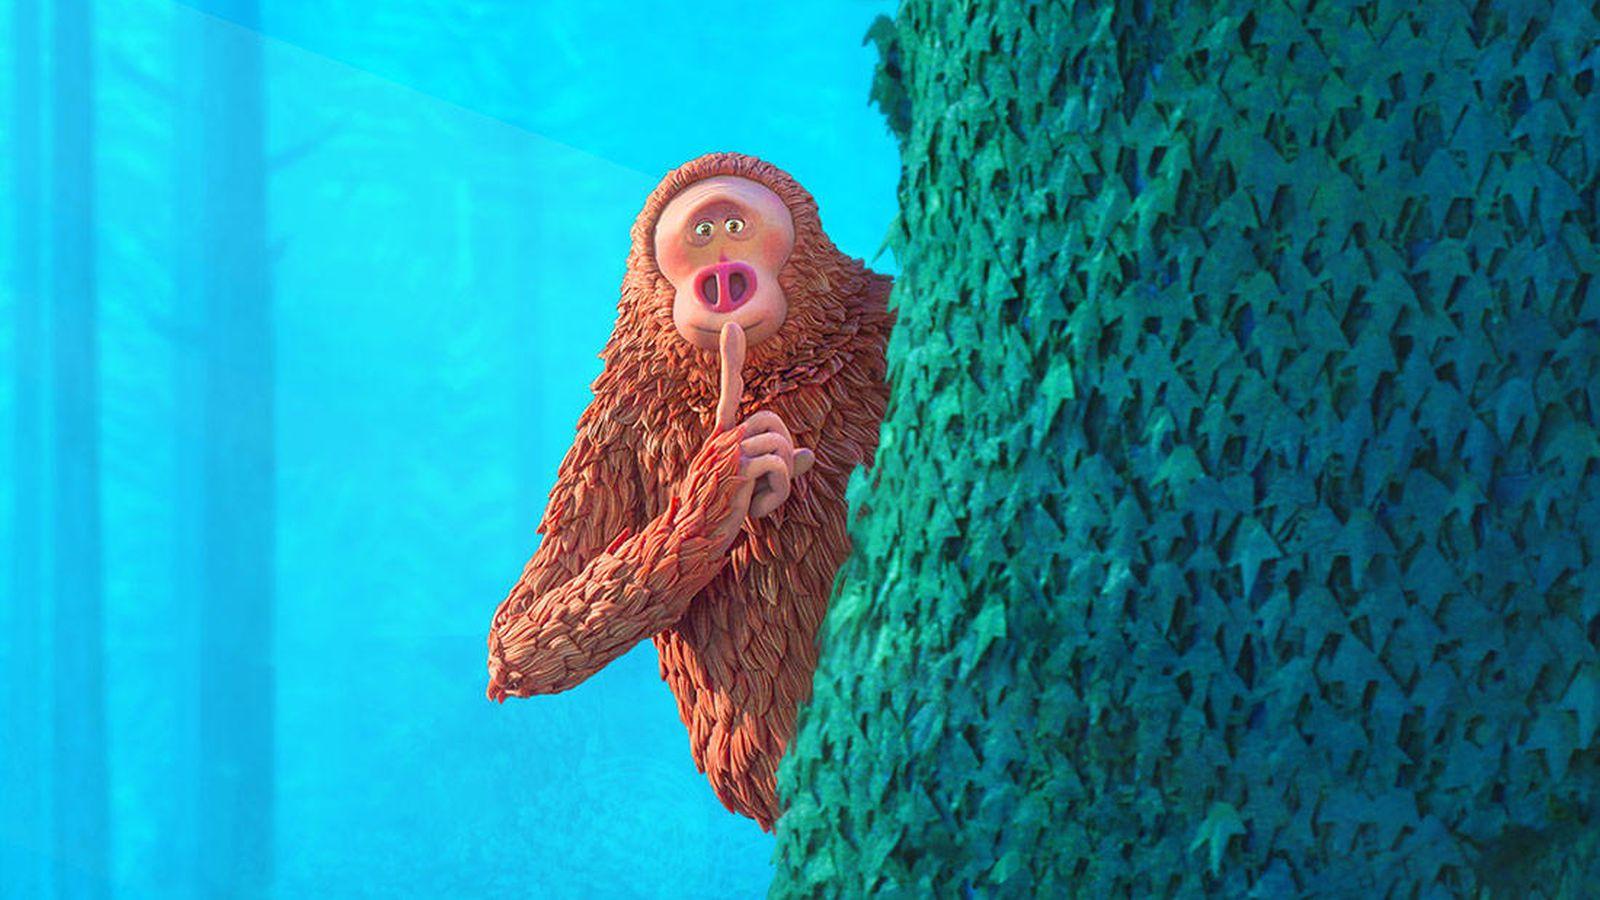 Missing Link Trailer Offers More Fun From Oscar Nominated Animators